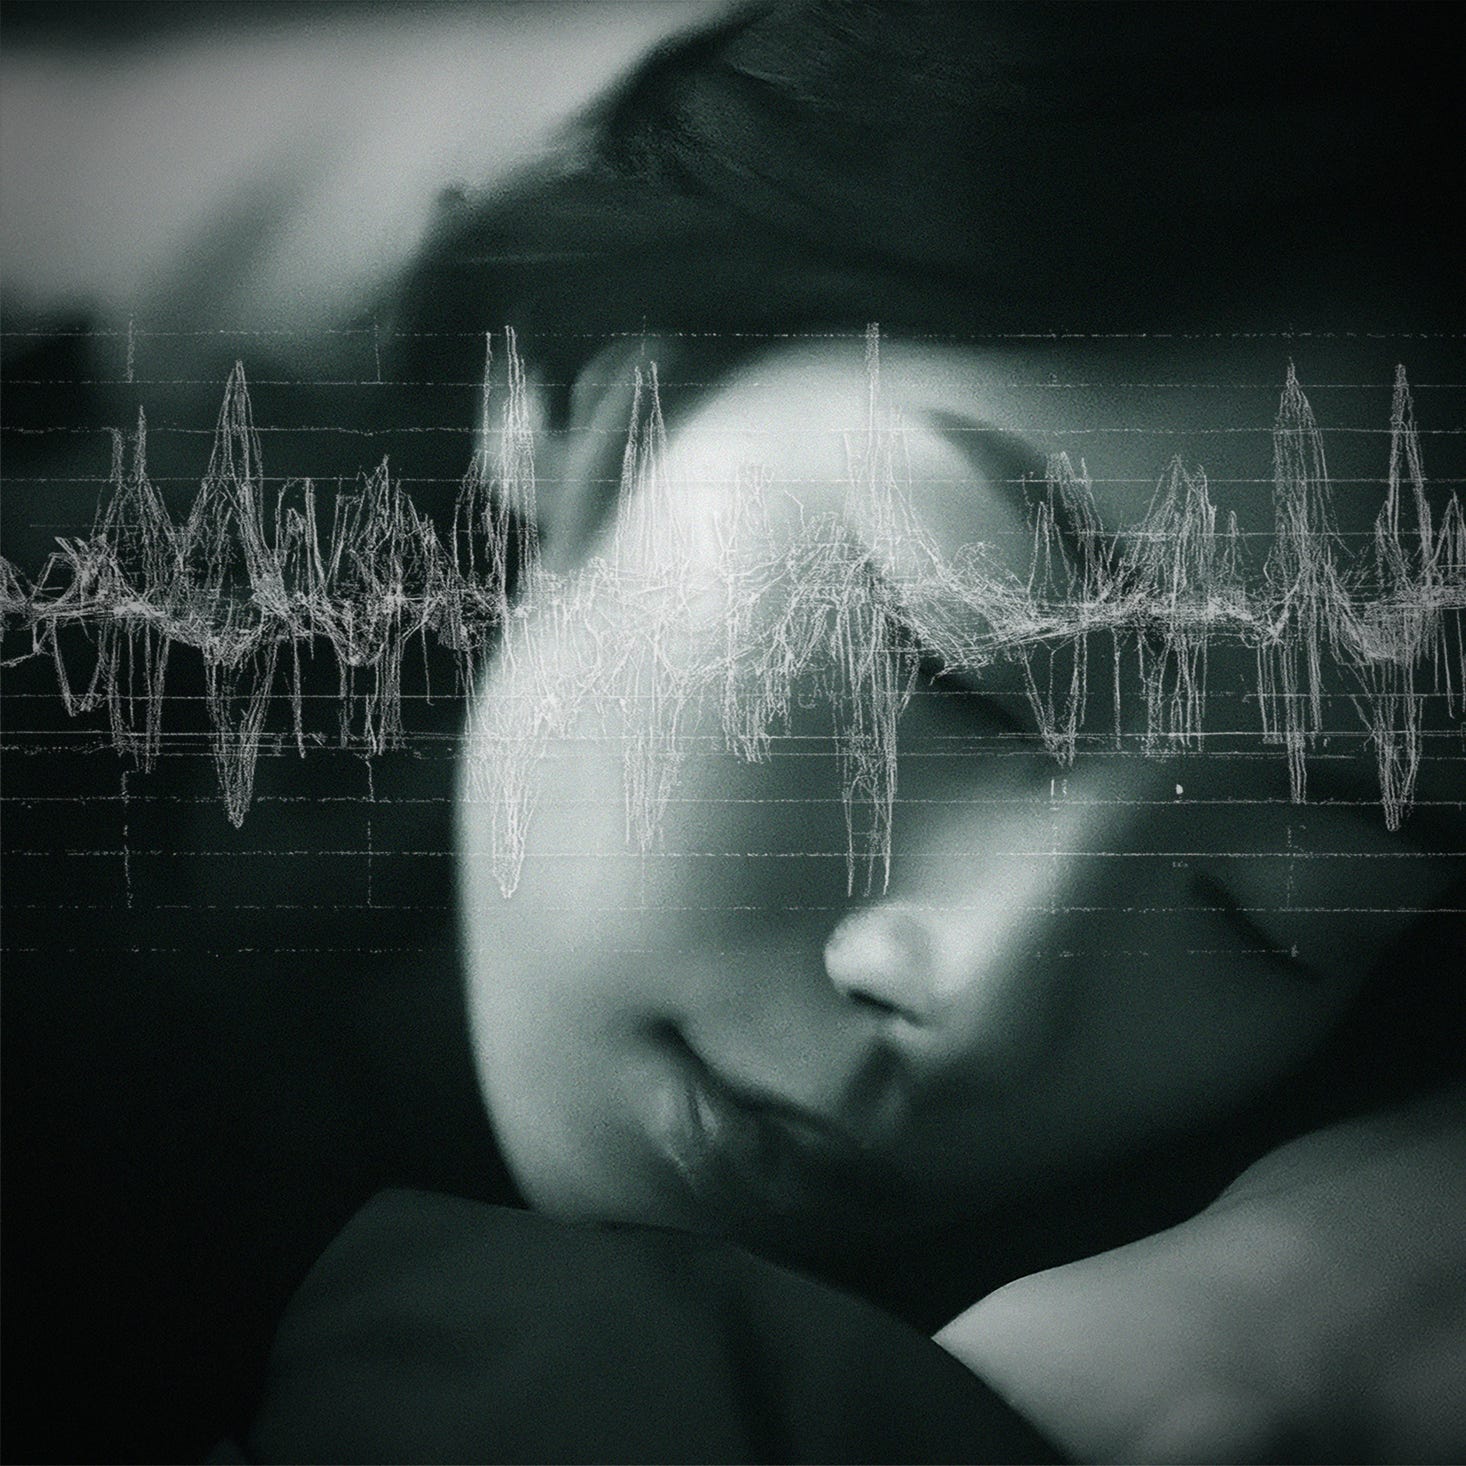 Beautiful Sleeping Asian Woman with brainwave encephalogram graphic image, b/w photography   f/low: Ambient Music inspired by the latest findings in neuroscience, auditory physiology and psychoacoustics. Binaural Beats, ASMR and Brown Noise form the basis of a musical melange dedicated to deep relaxation and sleep enhancement.